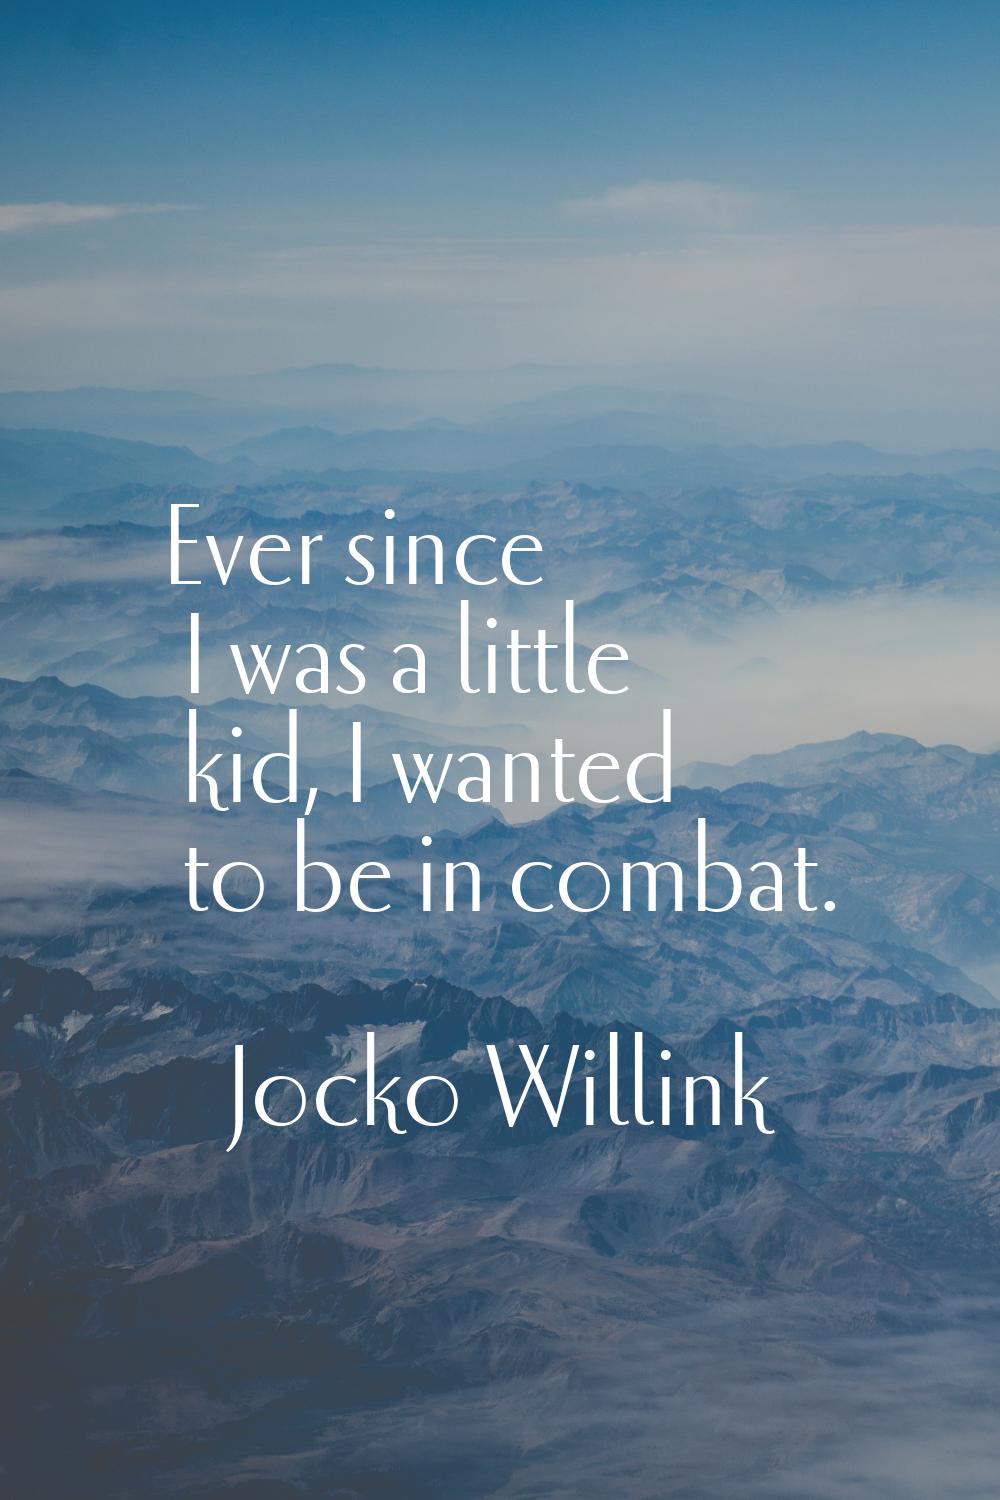 Ever since I was a little kid, I wanted to be in combat.